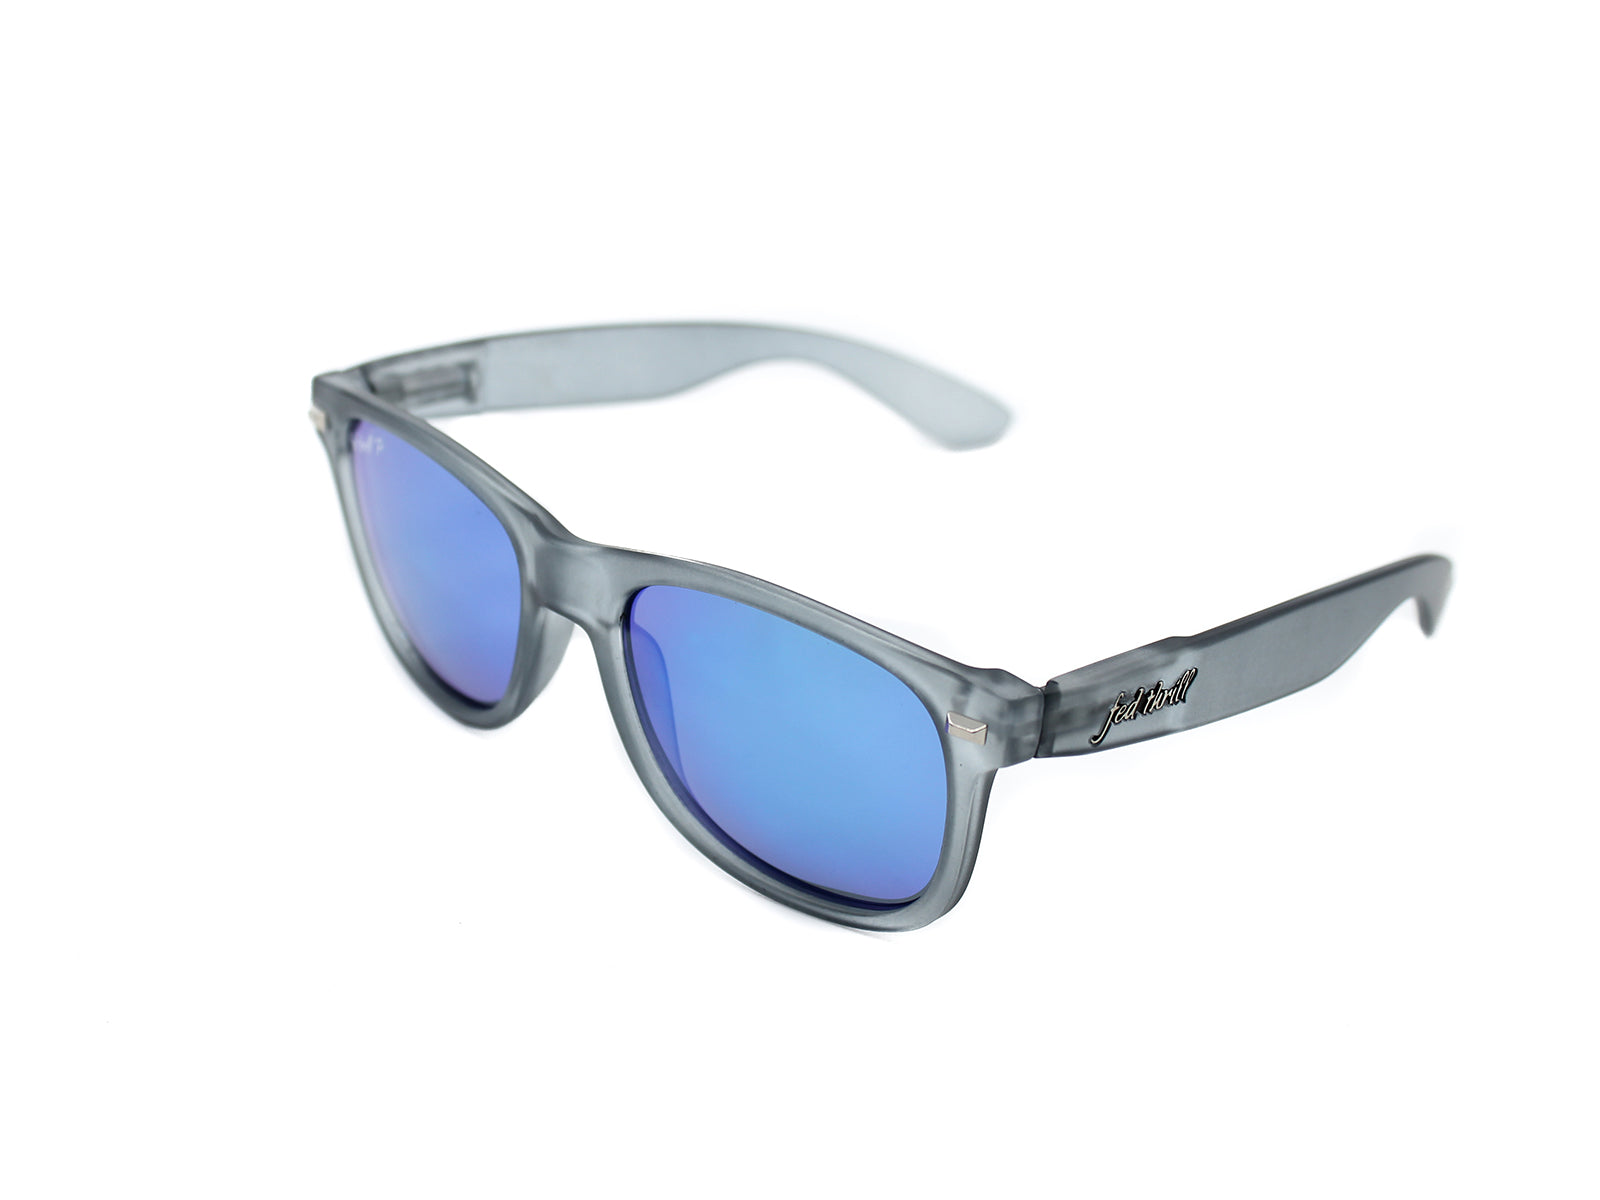 Fultons - Ceruleans: Frosted Gray / Mirrored Blue Polarized